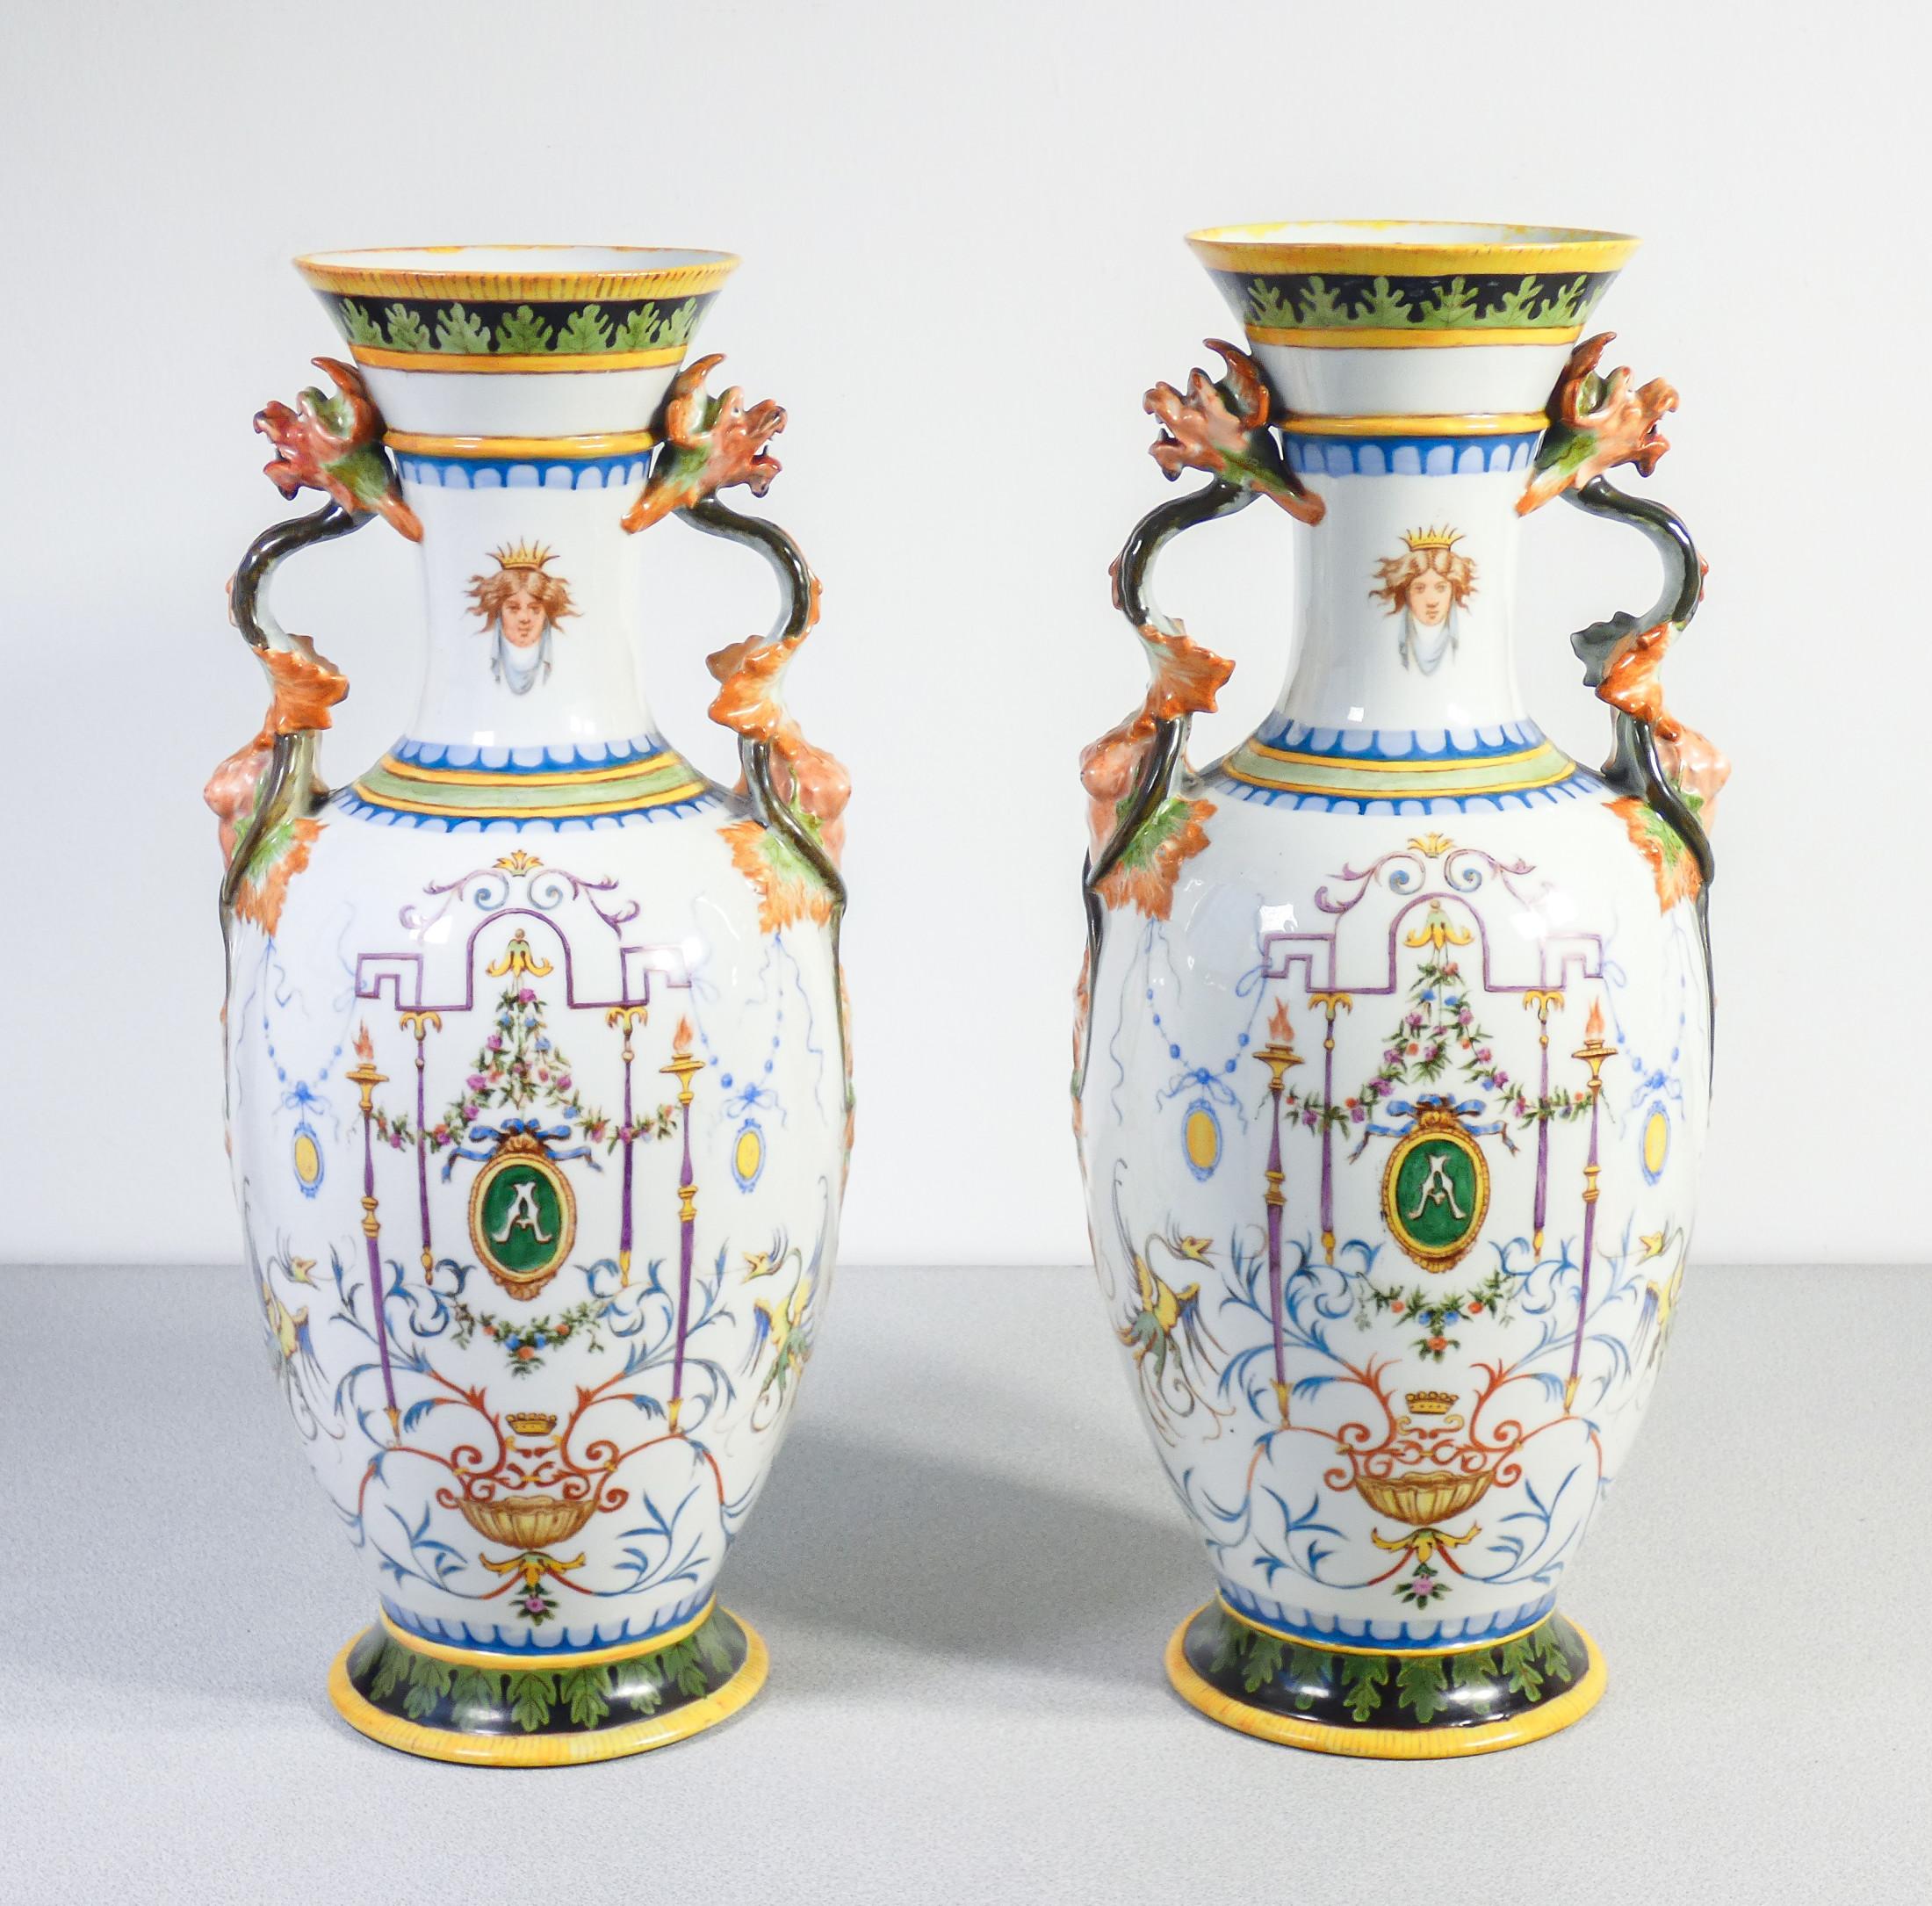 Pair of bi-anodized vases
painted ceramic
by hand with grotesques,
sculptures to the handles.
Signed Palmira Andreis.
Italy, 1887

ORIGIN
Italy

PERIOD
1887

AUTHOR
The paintings were
made by Palmira Andreis

MATERIALS
Hand painted